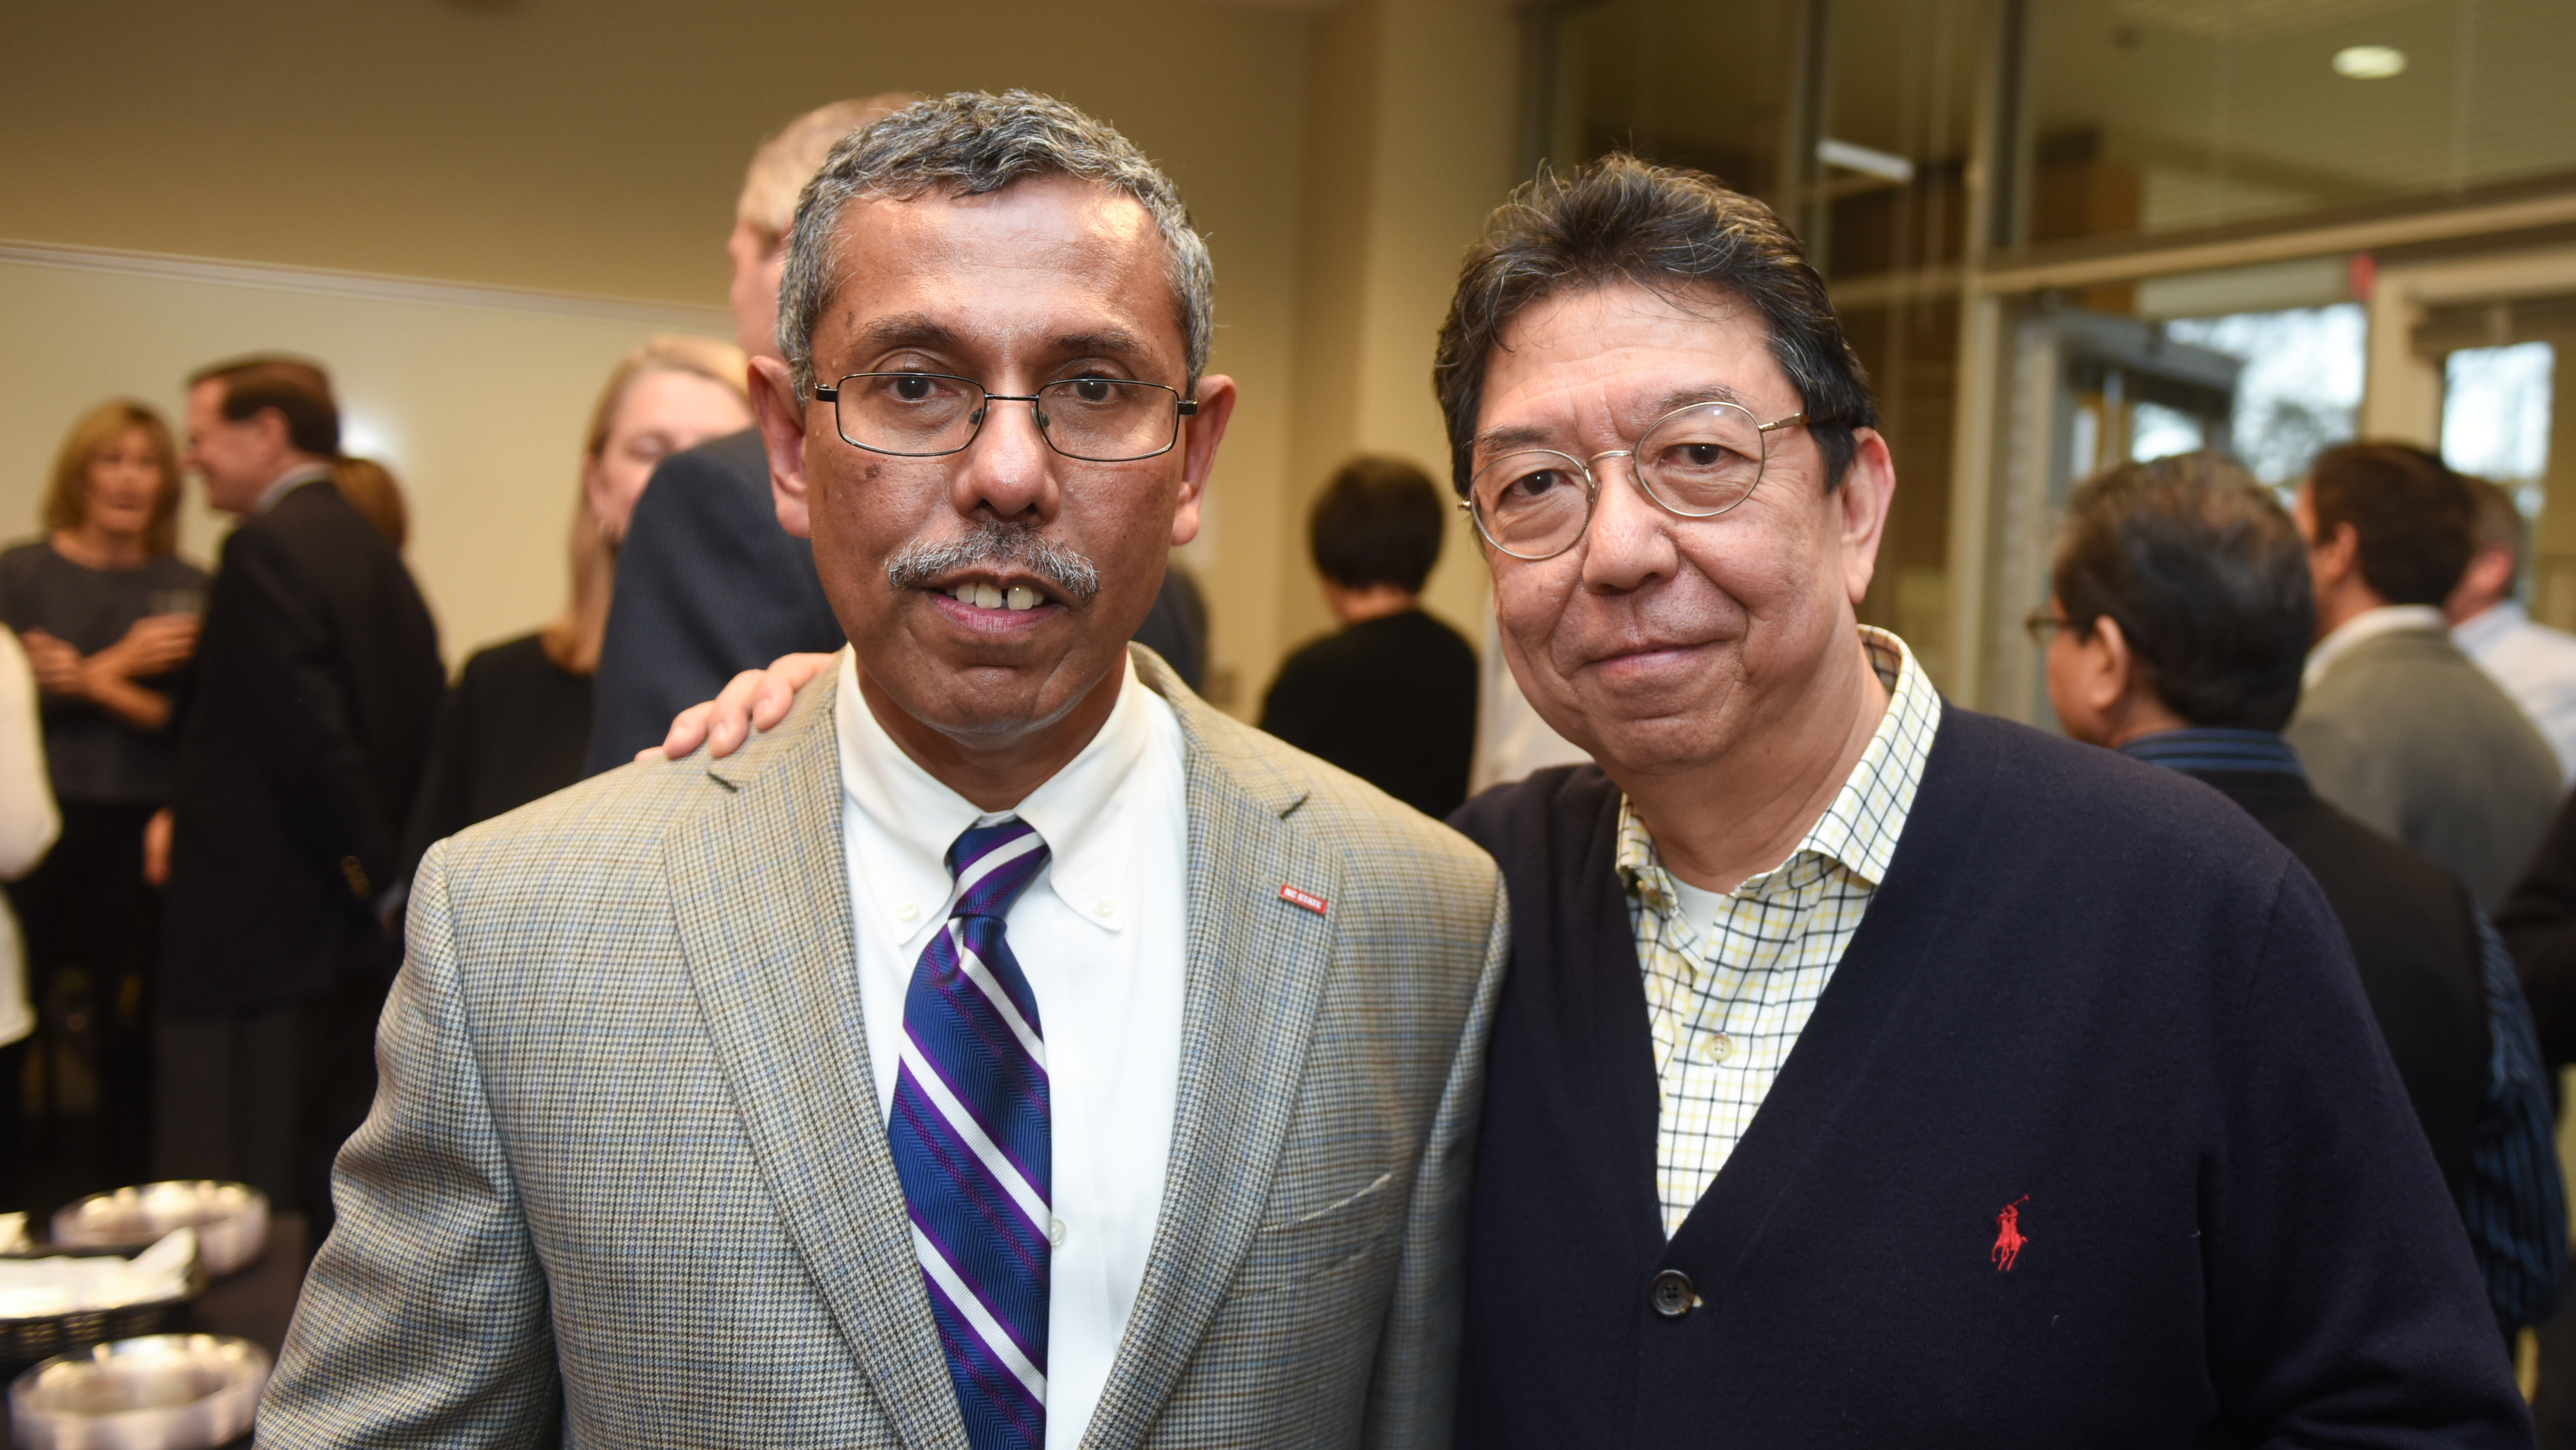 Dr. Hasan Jameel and Dr. Vincent Chiang